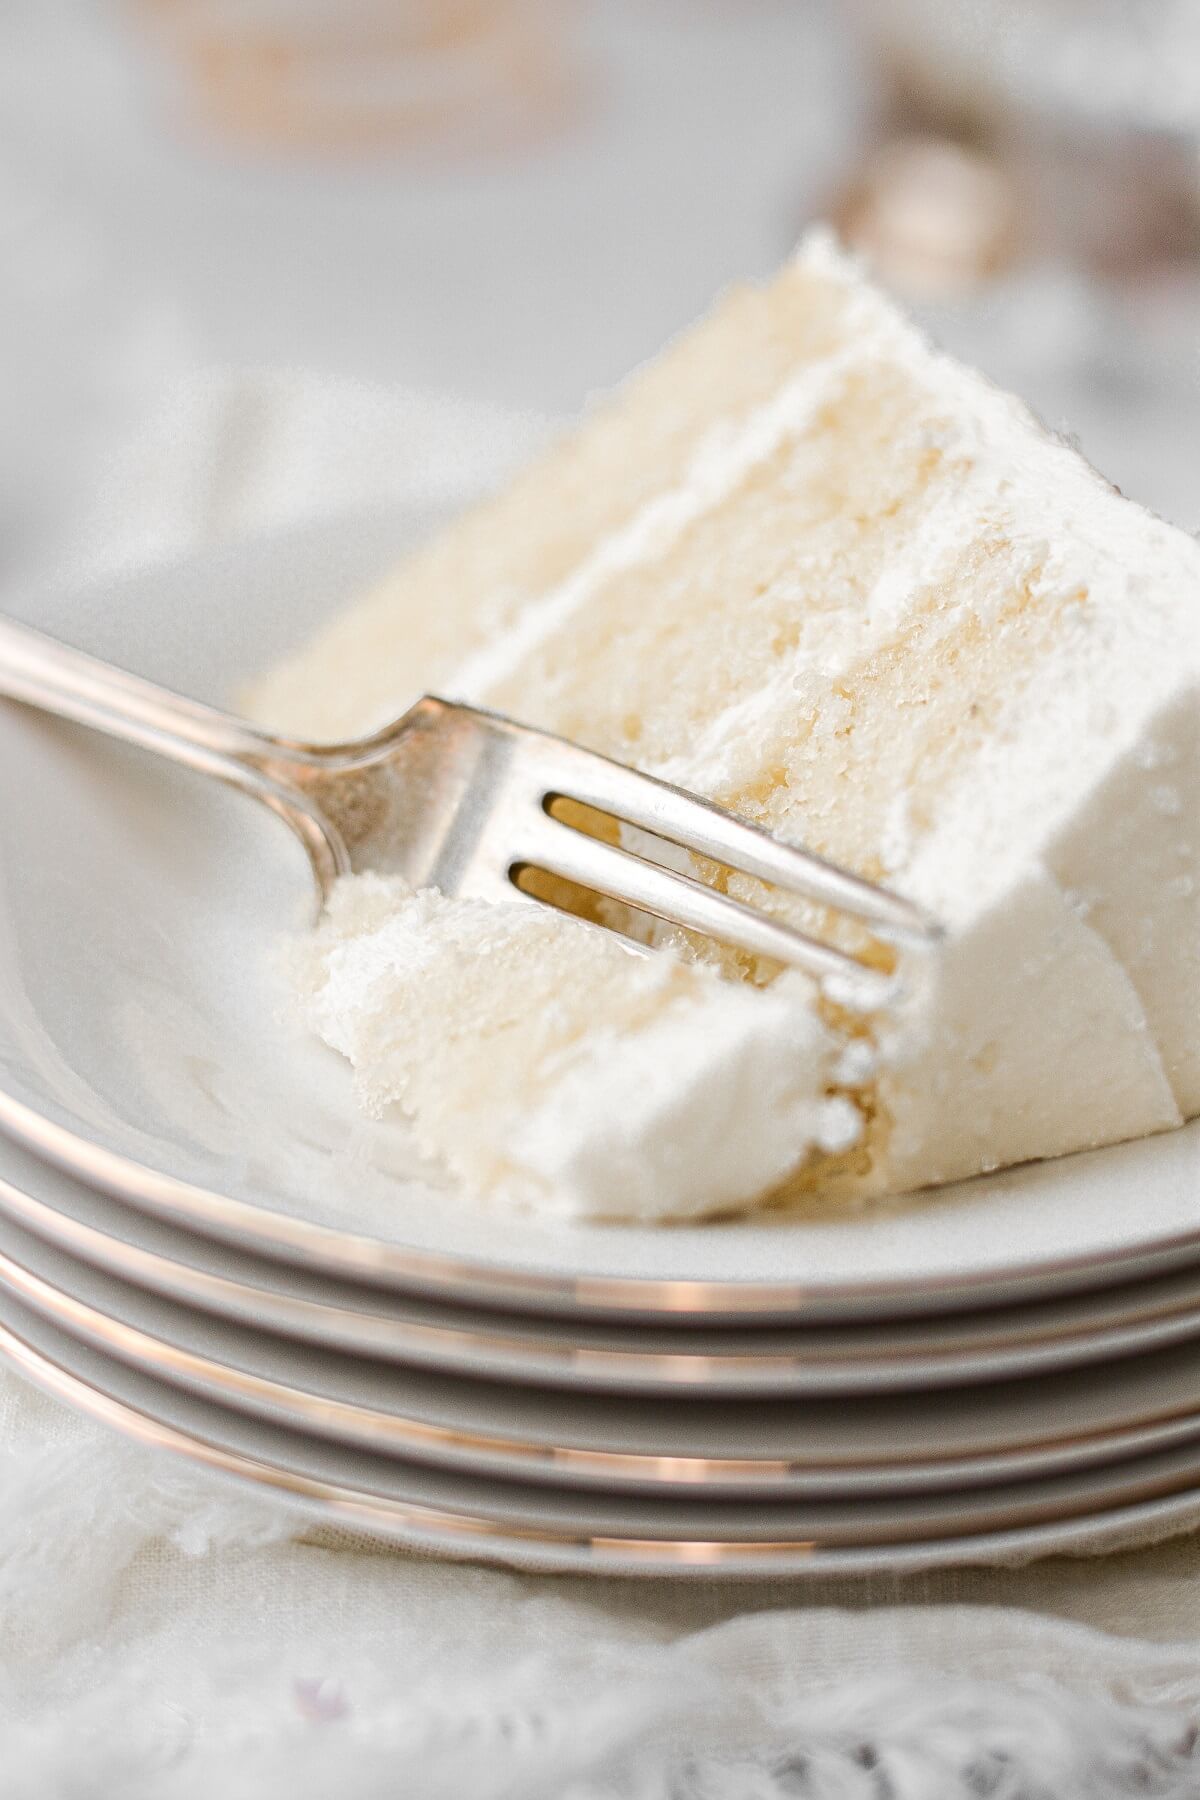 A slice of champagne cake with a bite cut.